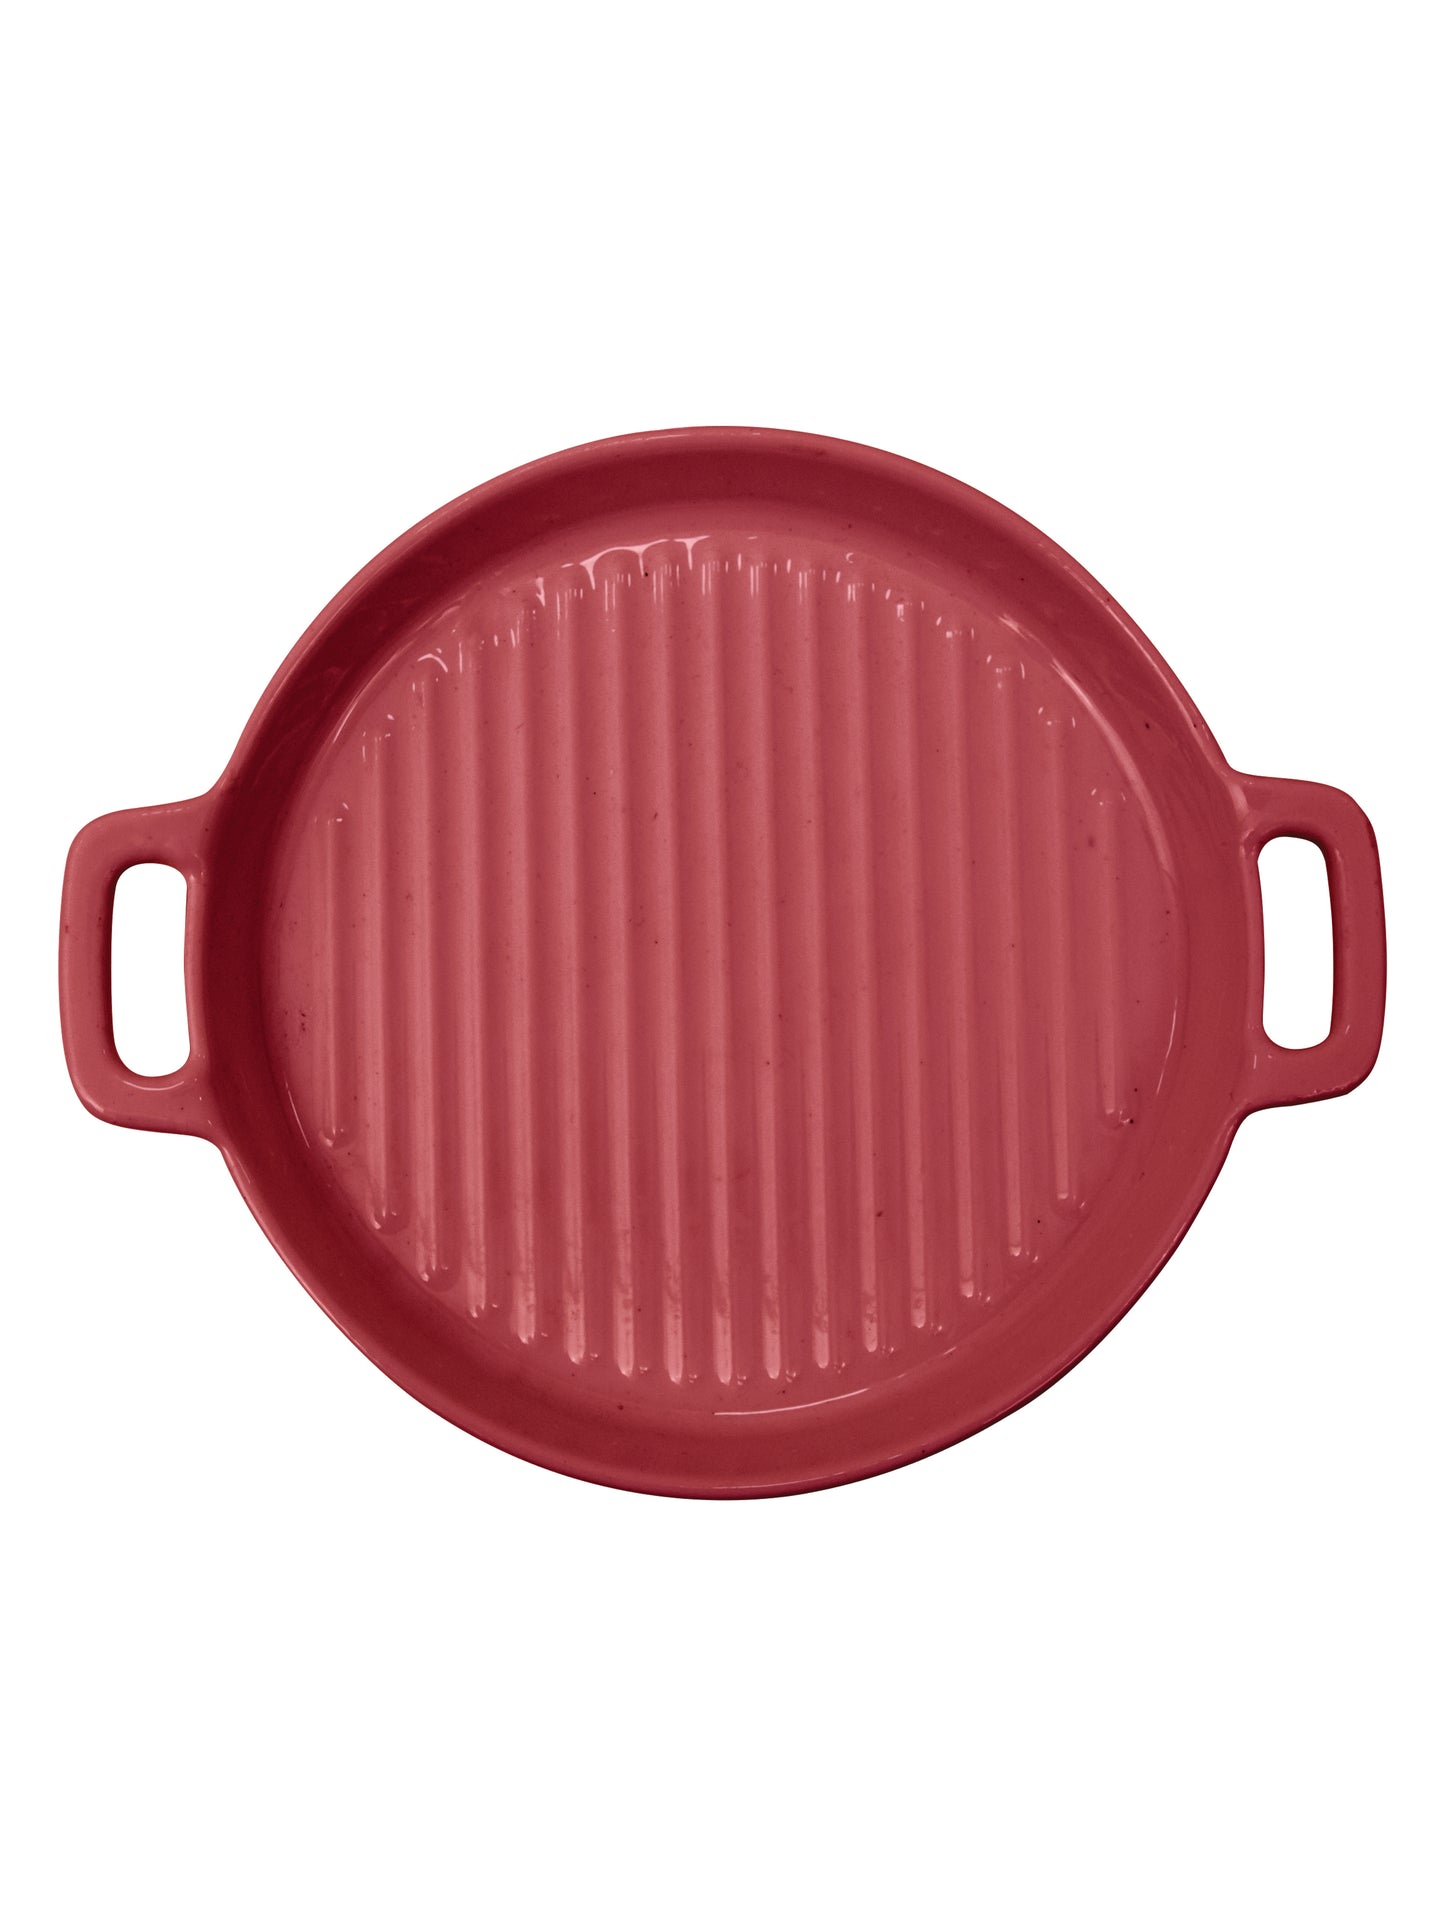 Ceramic Round with Handle Grill Plates for Serving, Red